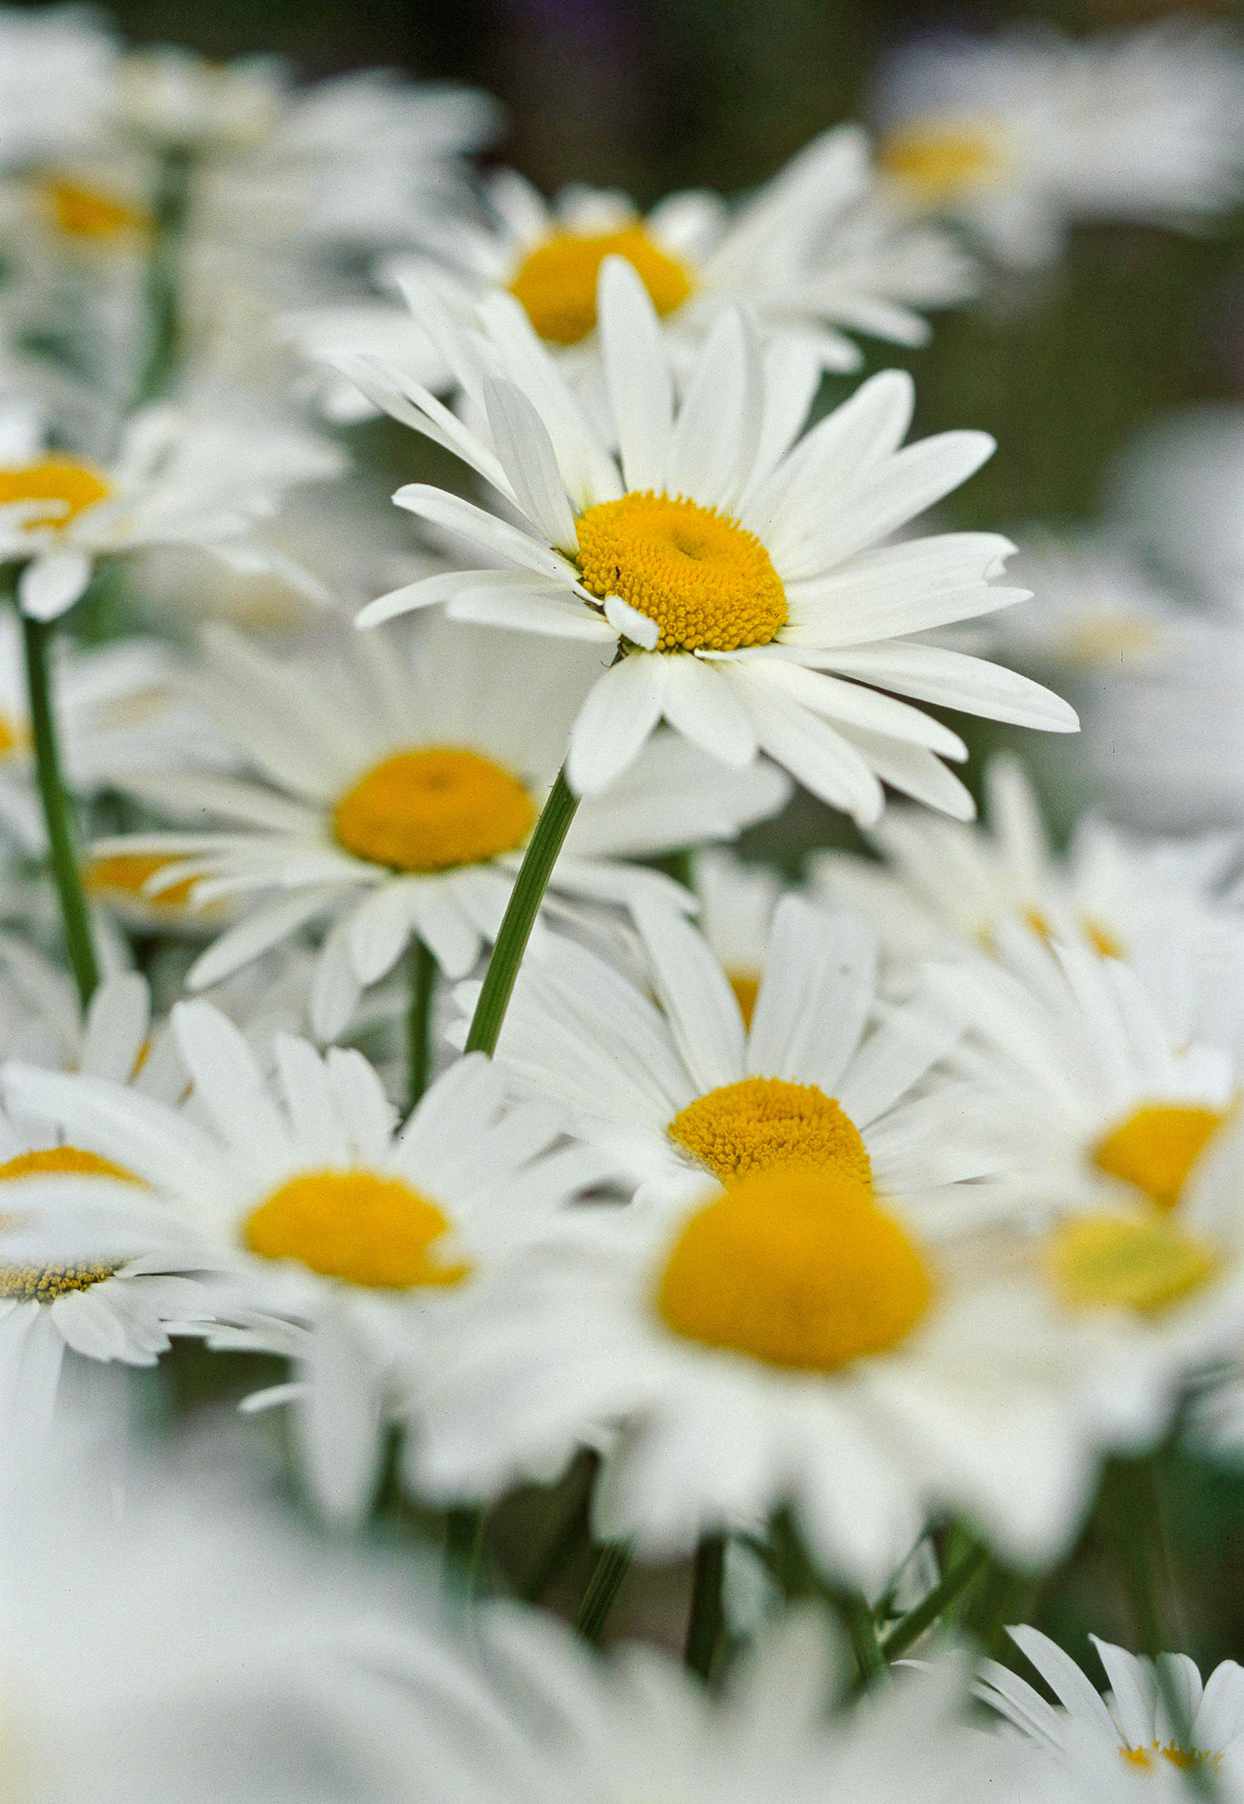 5 Fun Facts About Daisies You Probably Didn't Know